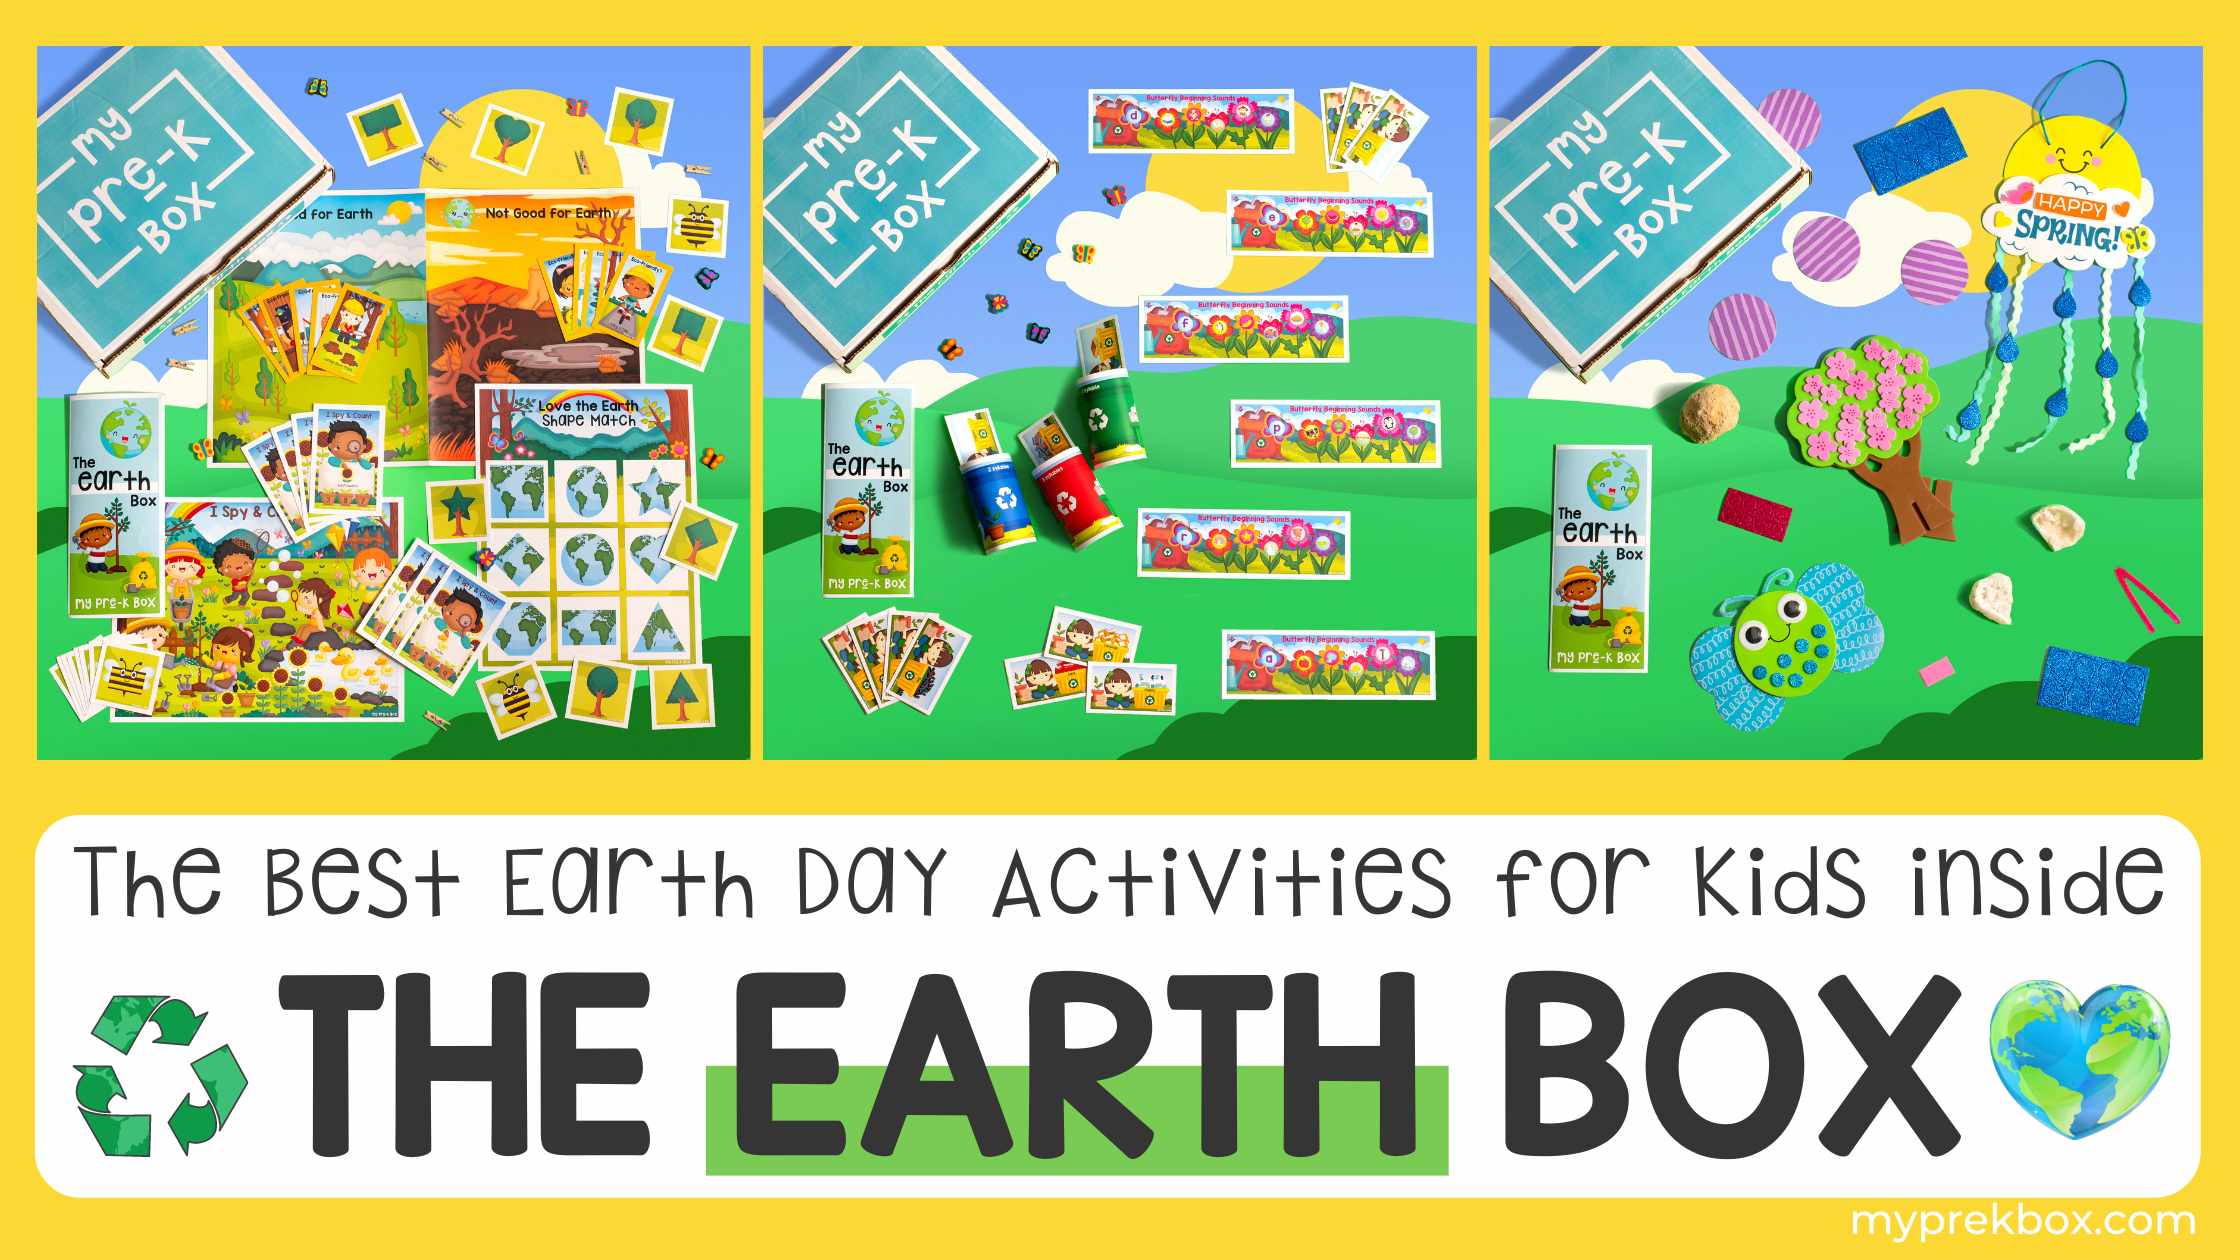 Inside The Earth Box: The Best Earth Day-themed Activities for Preschoolers